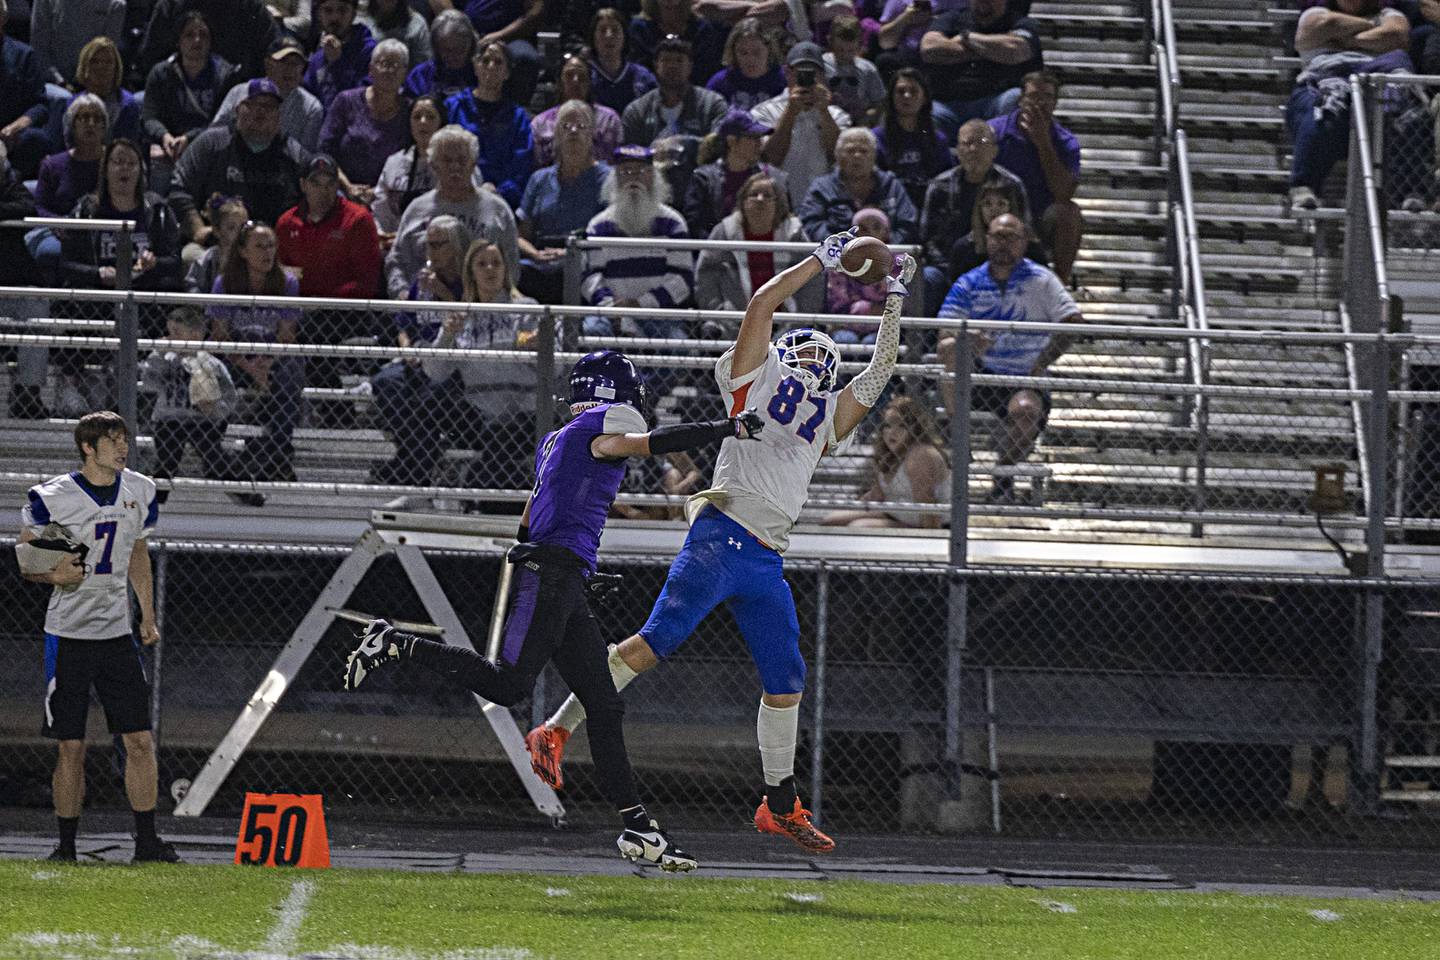 Genoa-Kingston’s Hayden Hodgson hauls in a catch for big yards against Dixon’s Cort Jacobson Thursday, Sept. 14, 2023 in a game at Dixon High School.